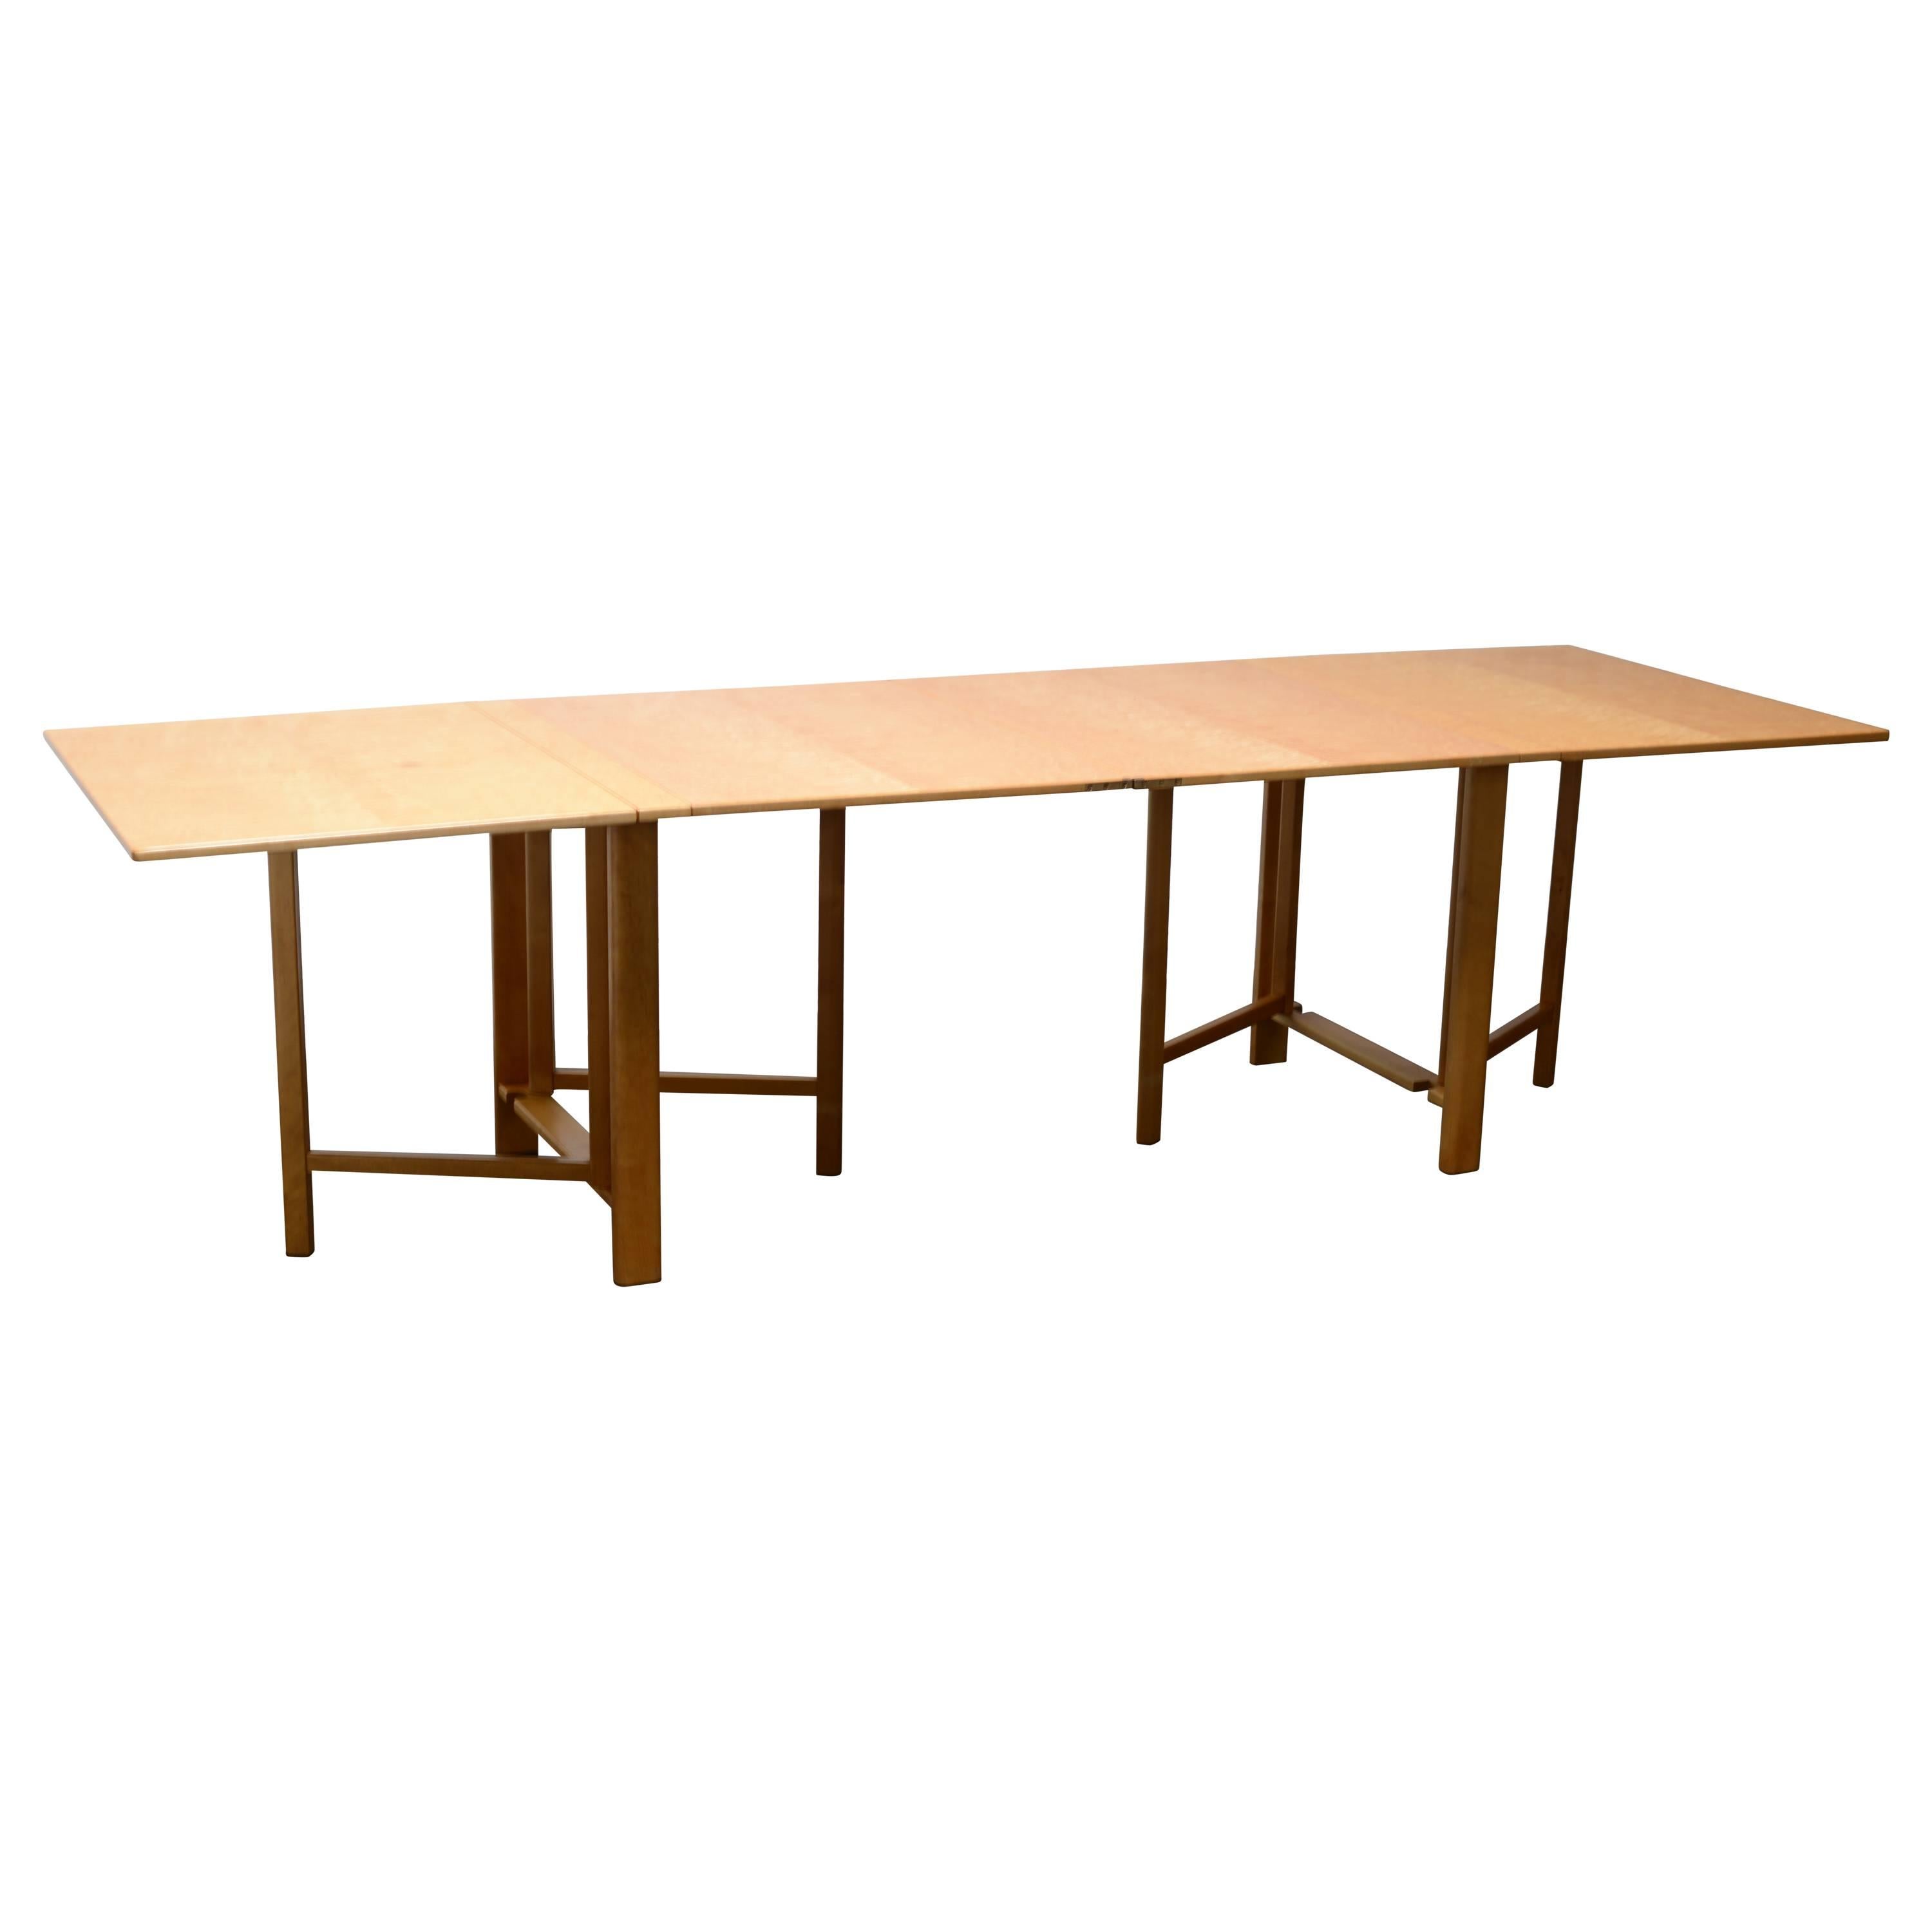 Bruno Mathsson, Maria Flap Folding Table, Beechwood Made in Sweden in 1960 For Sale